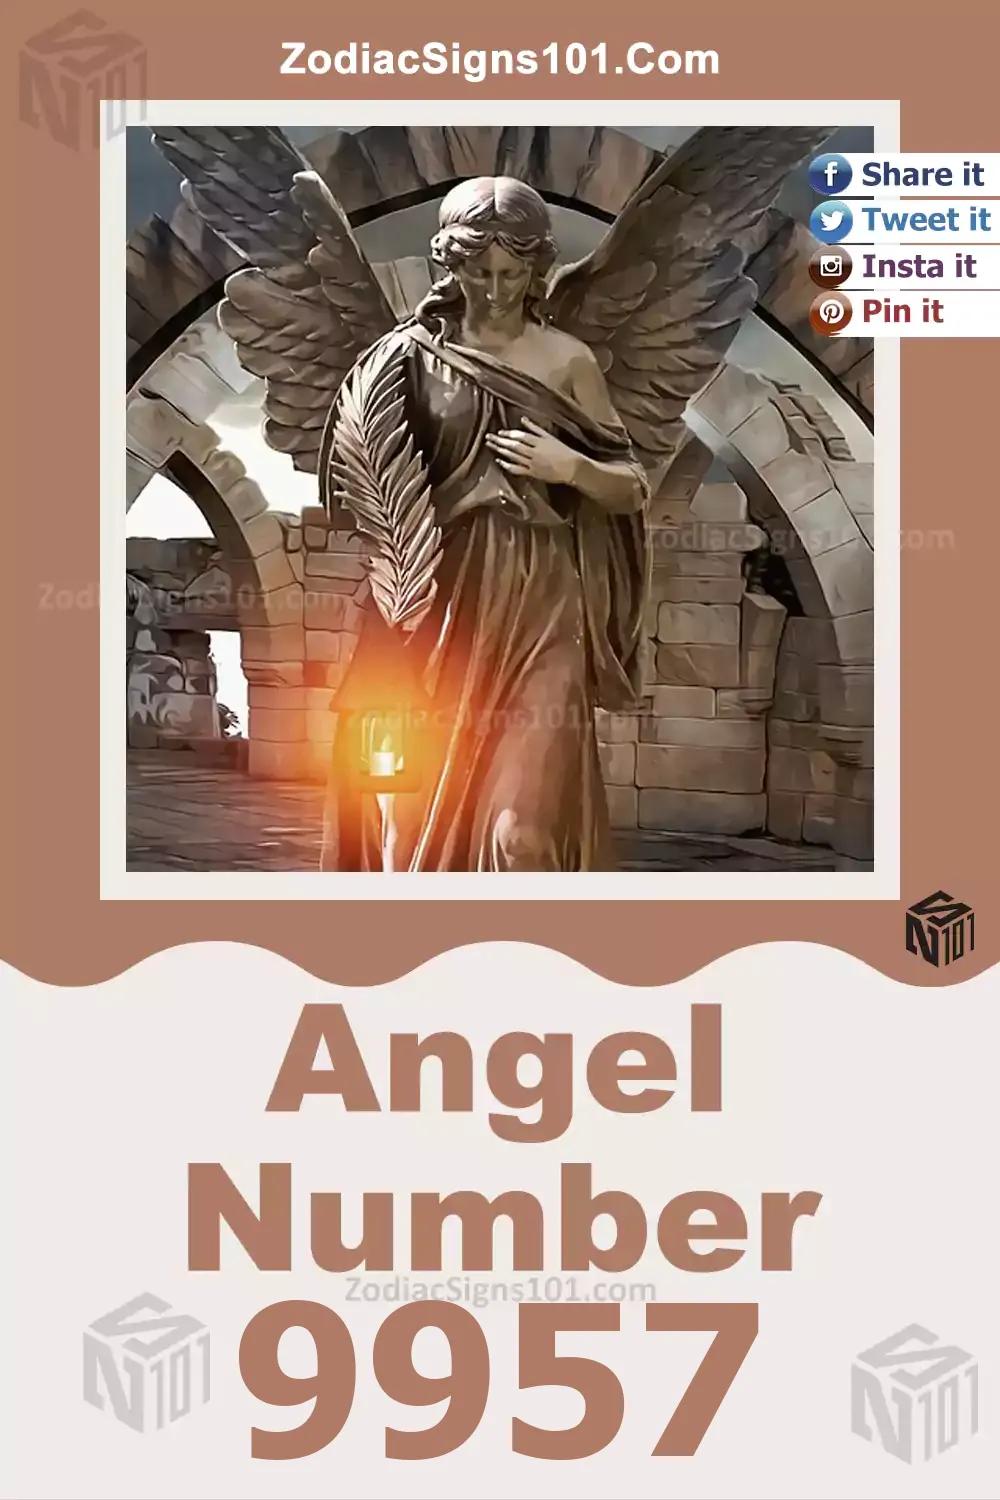 9957 Angel Number Meaning